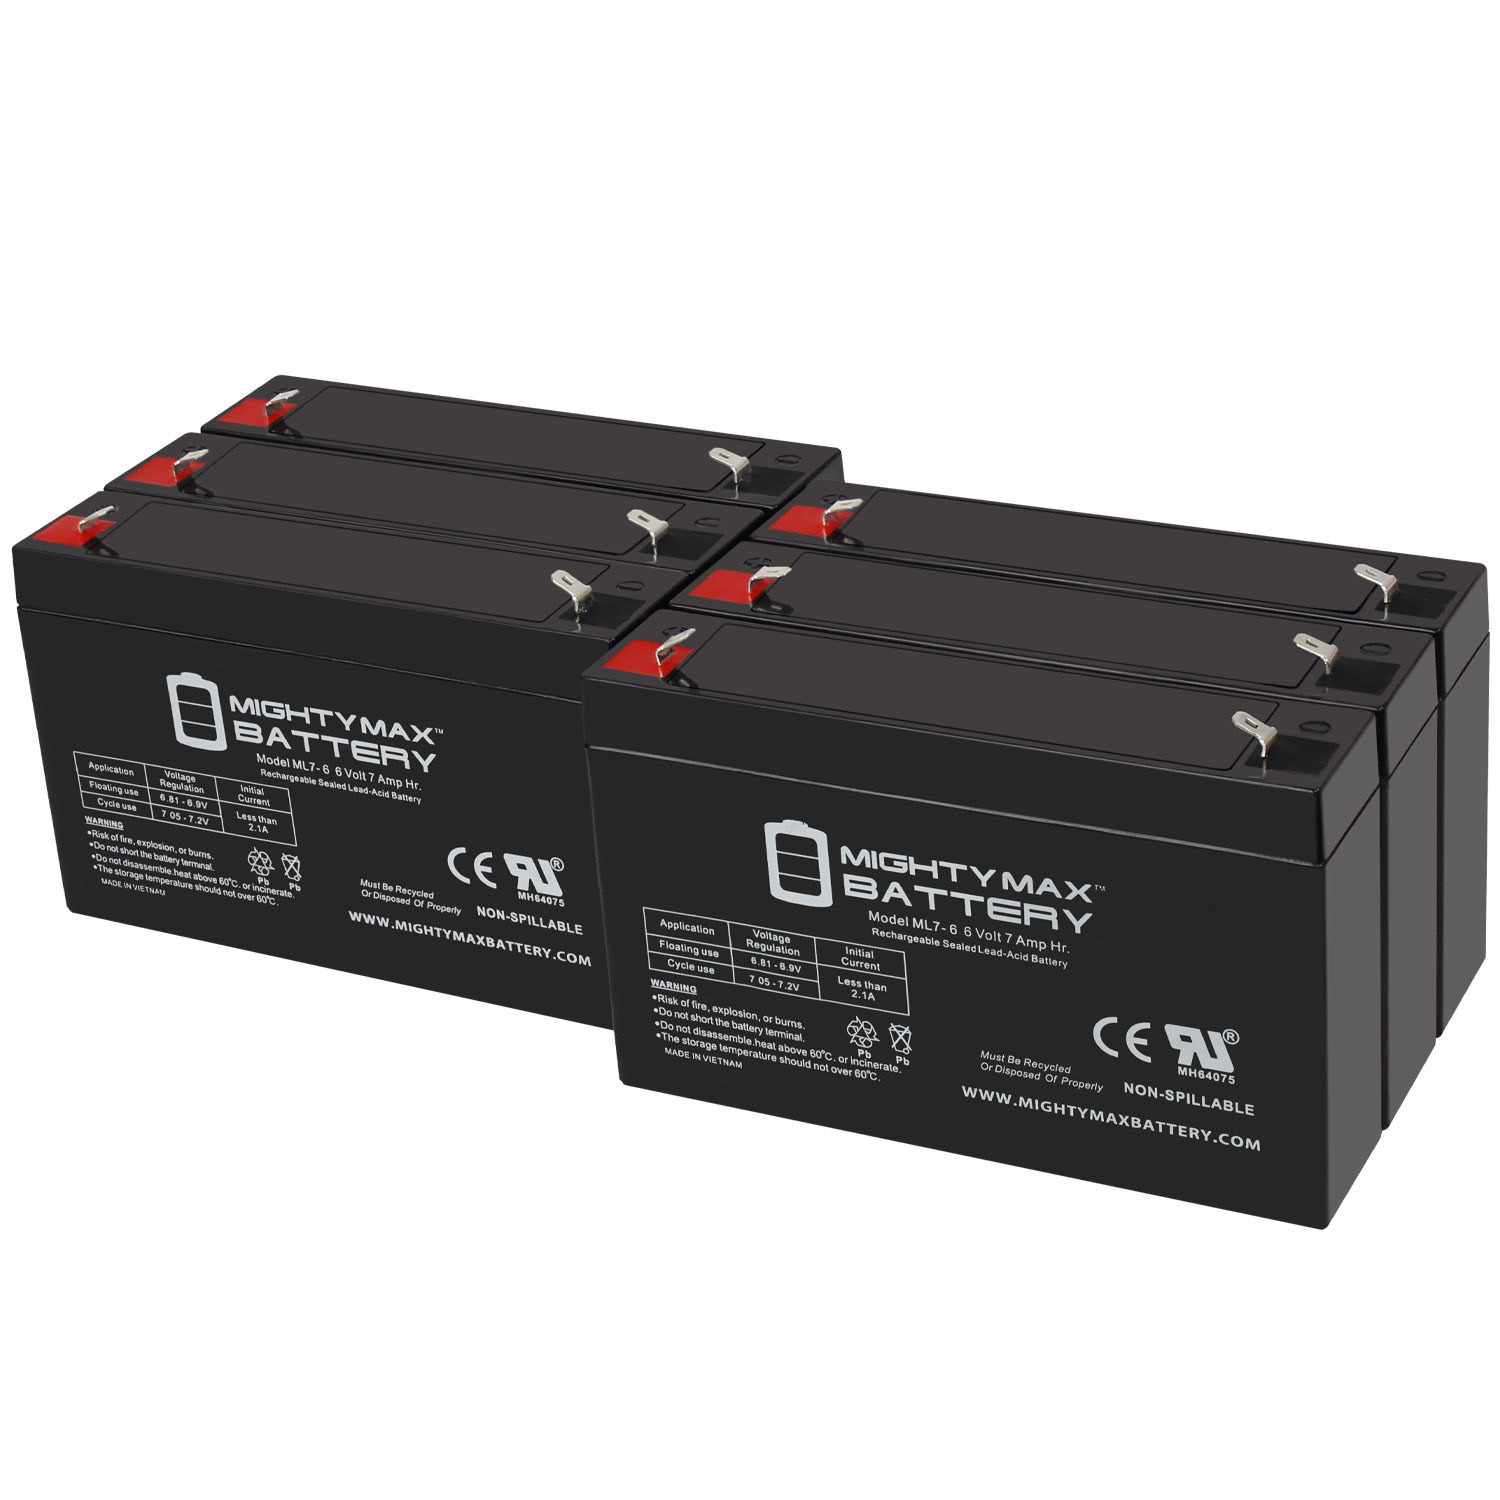 6V 7Ah SLA Replacement Battery for Yukon Denali Fire Rescue - 6 Pack